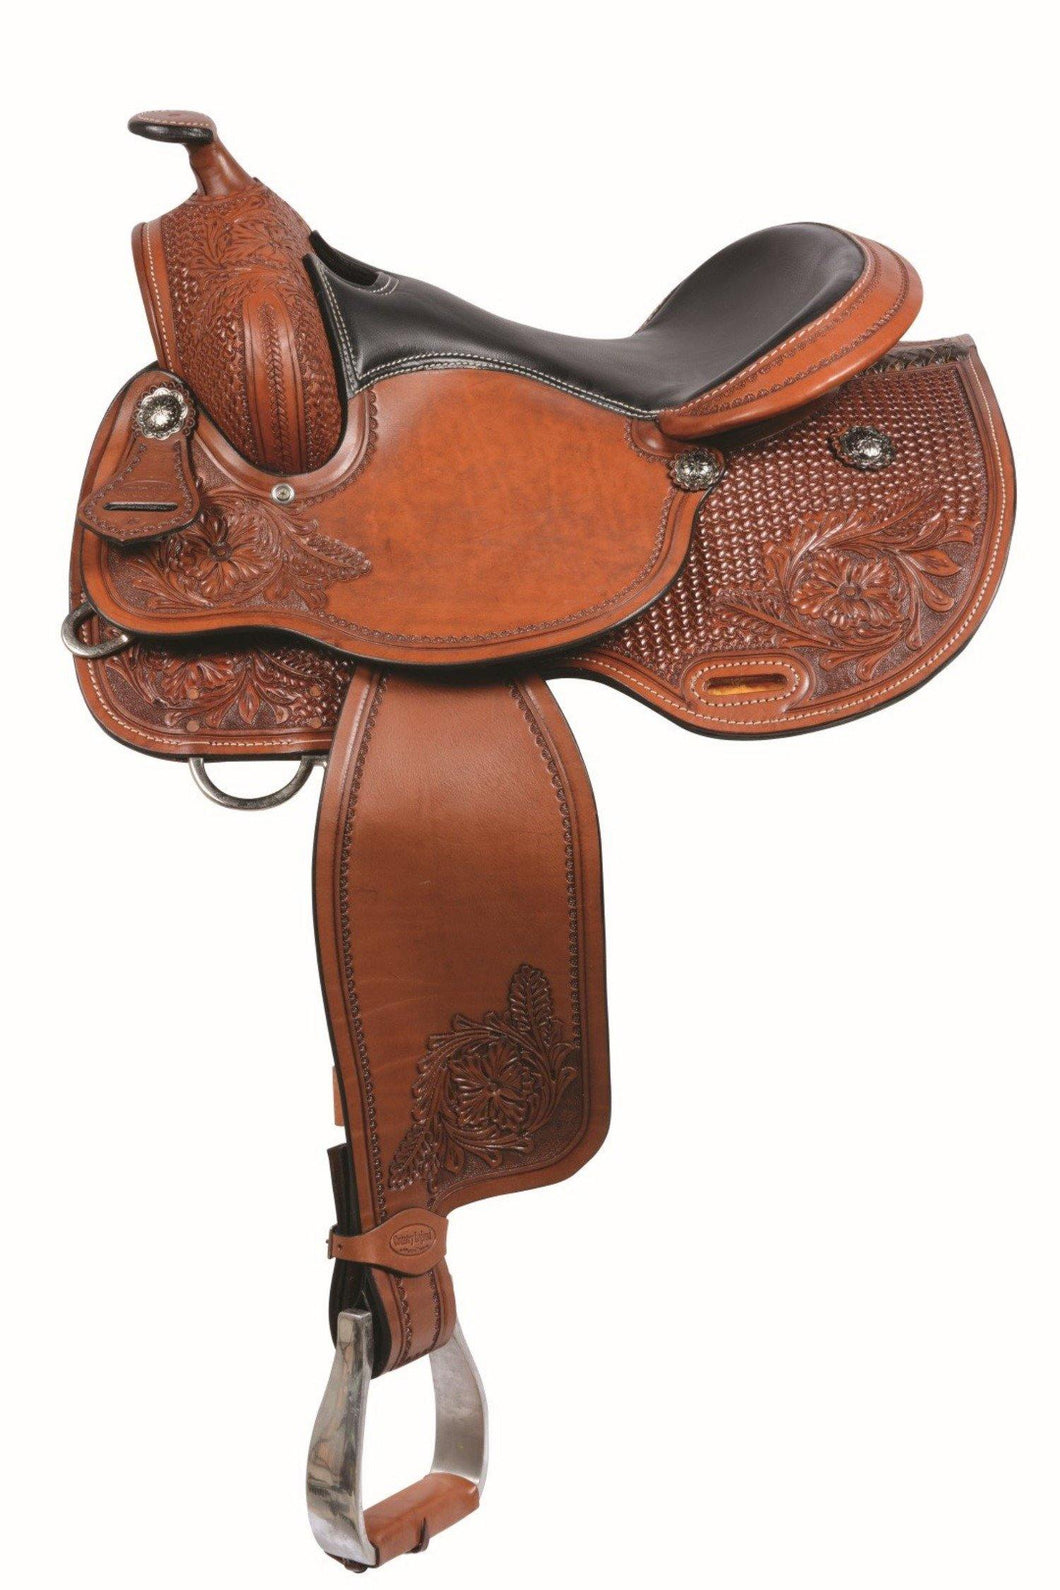 Combo Flower Trail Saddle By Country Legend - FG Pro Shop Inc.